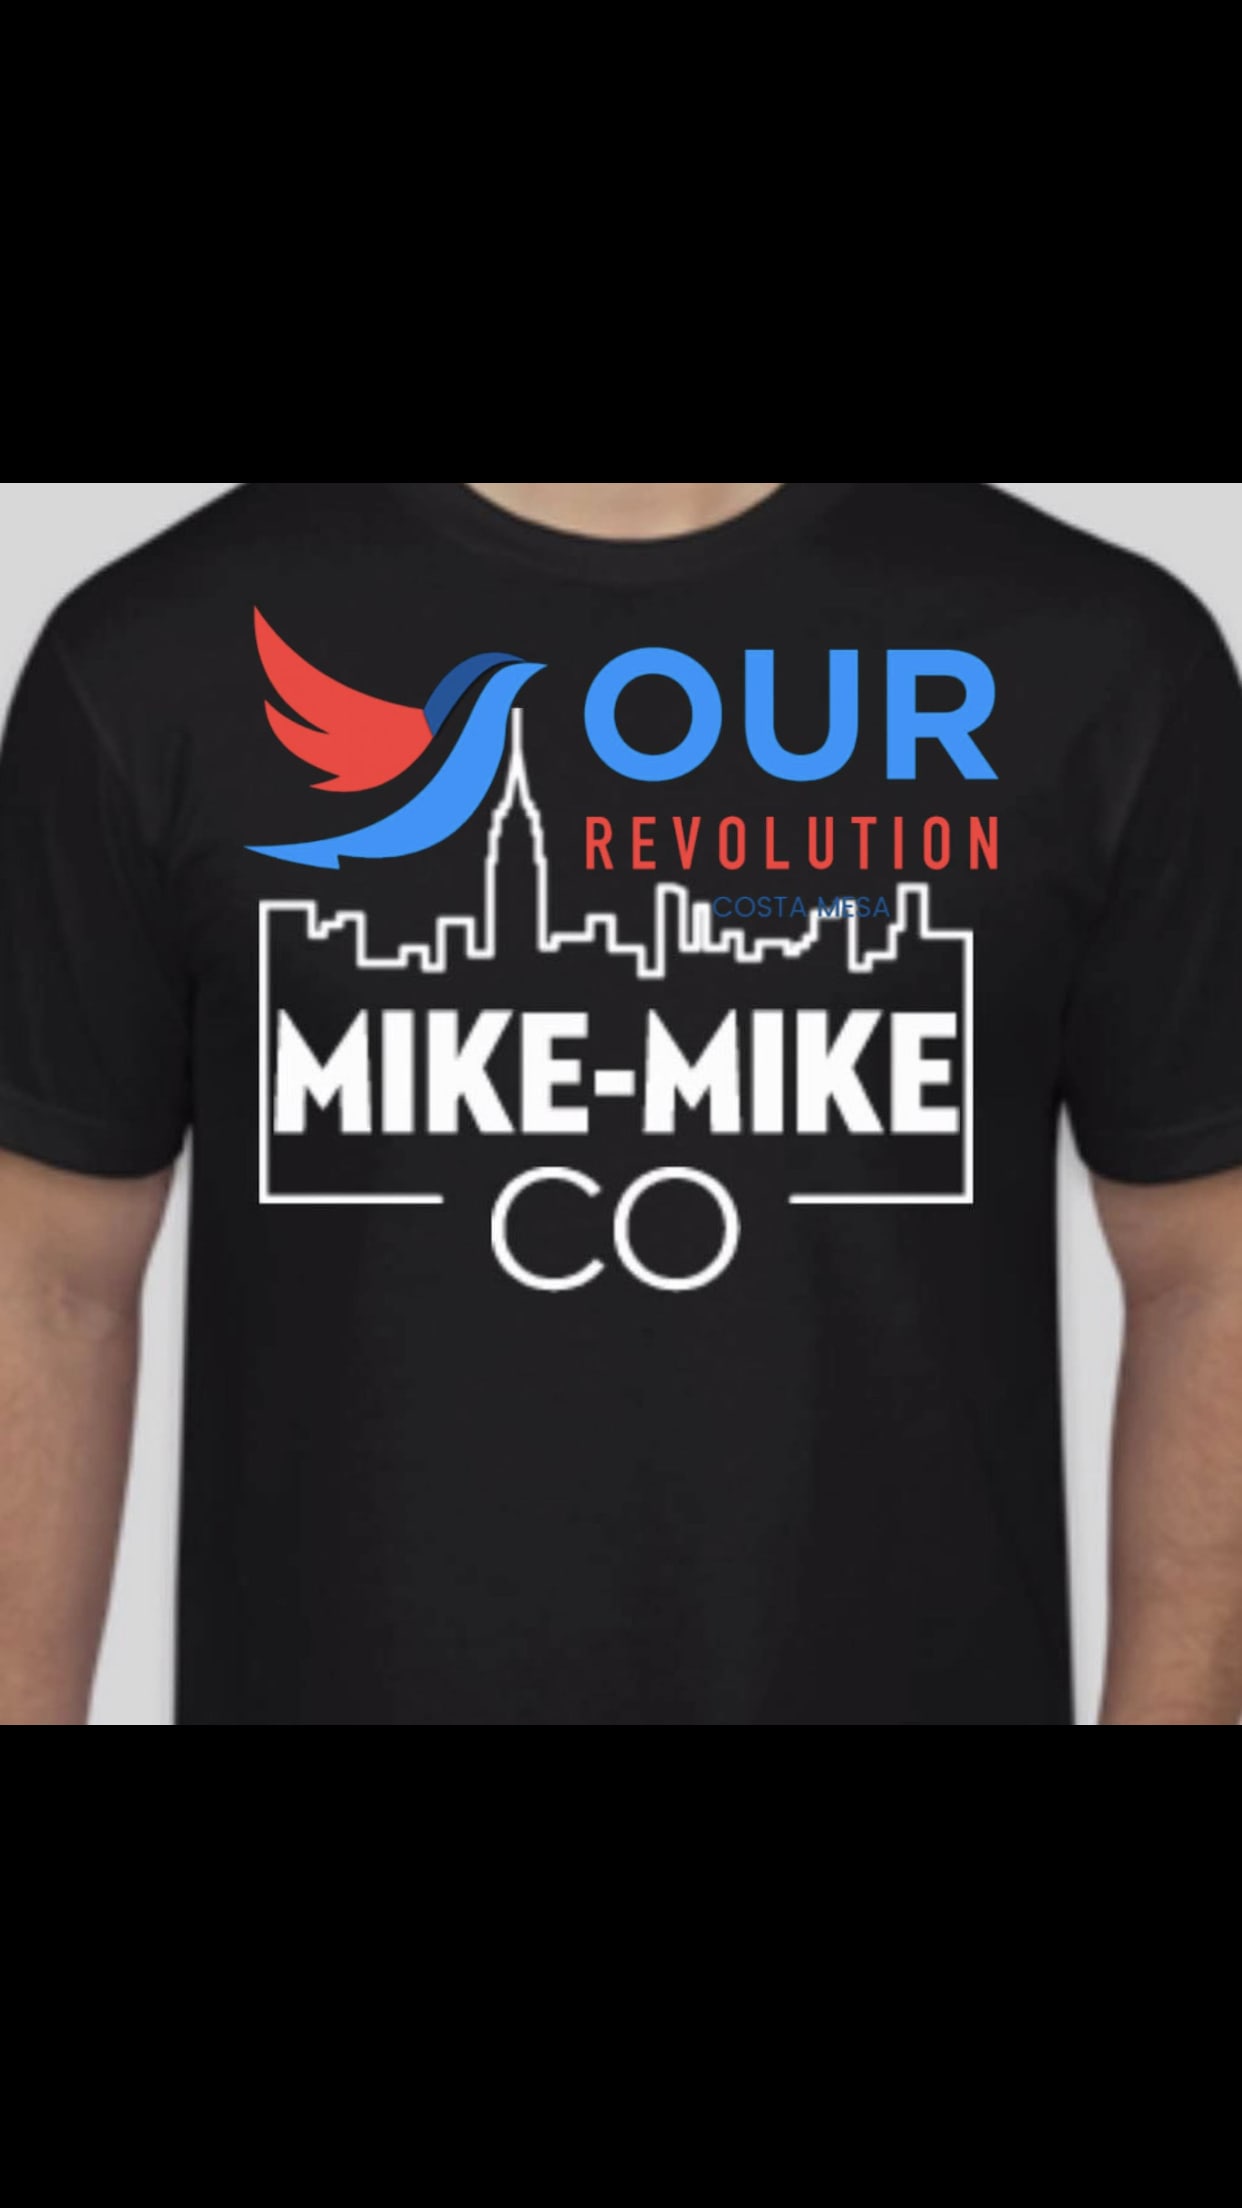 Mike-Mike & Co